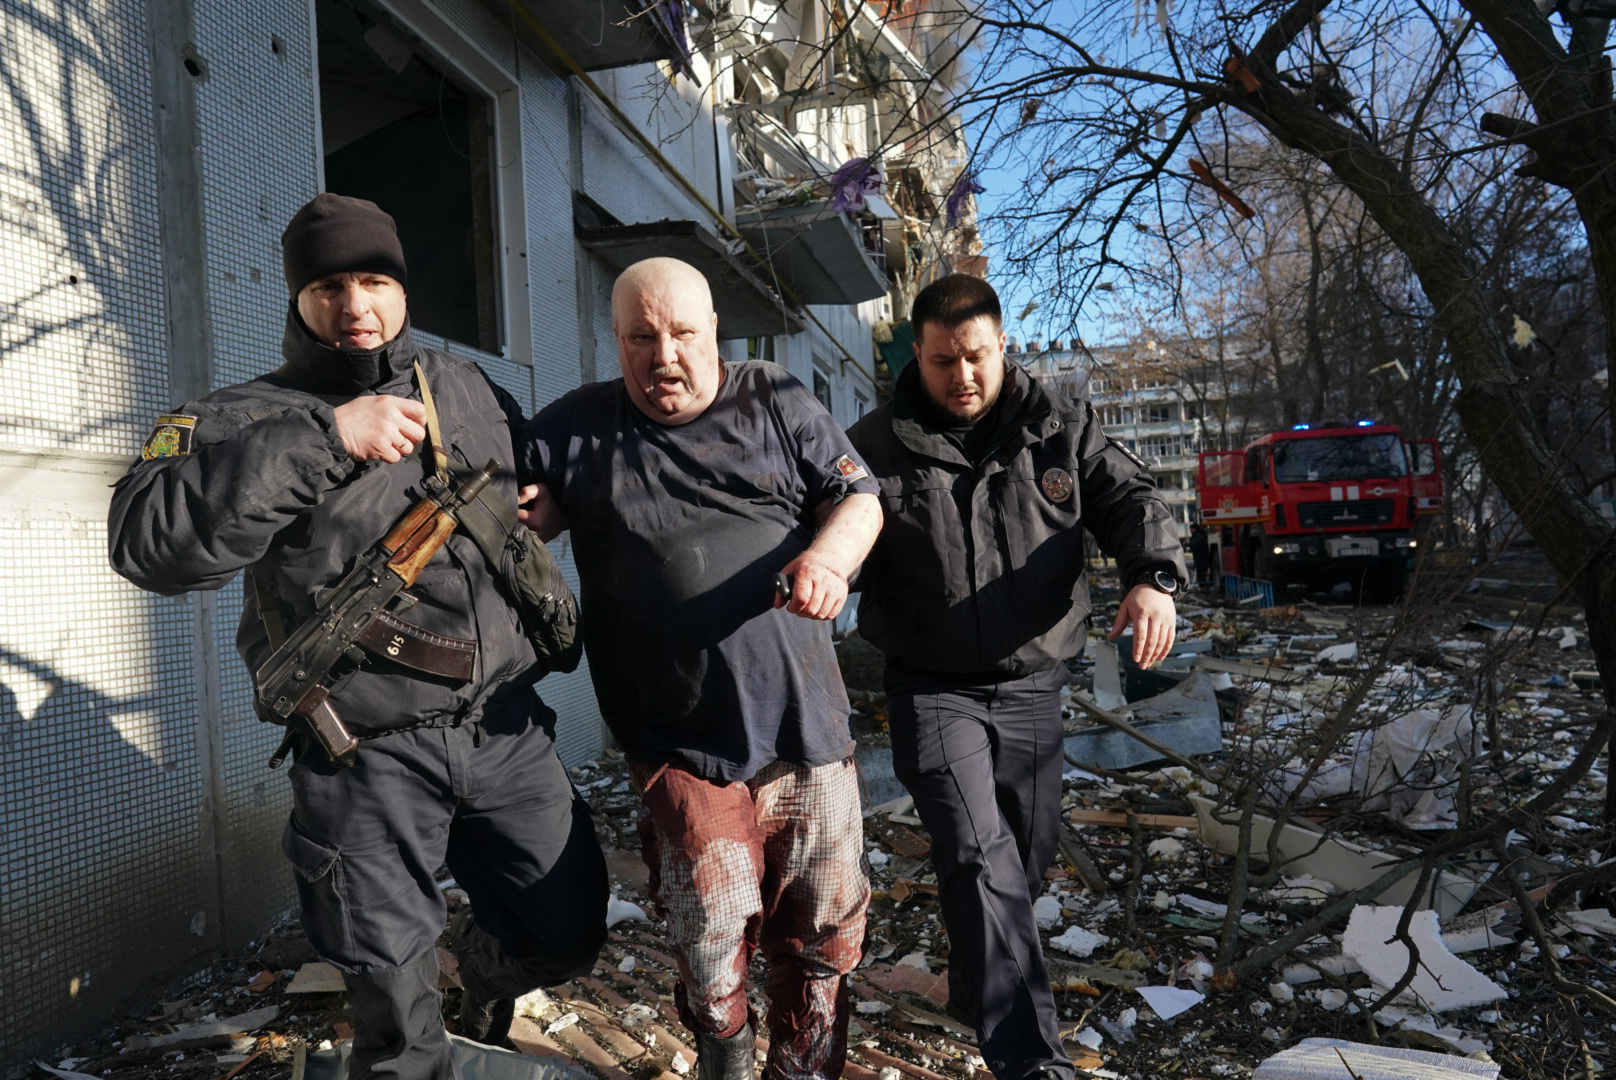 Ukrainian security forces accompany a wounded man after an airstrike hit an apartment complex in Chuhuiv, Kharkiv Oblast on Feb. 24. (Wolfgang Schwan—Anadolu Agency/Getty Images)